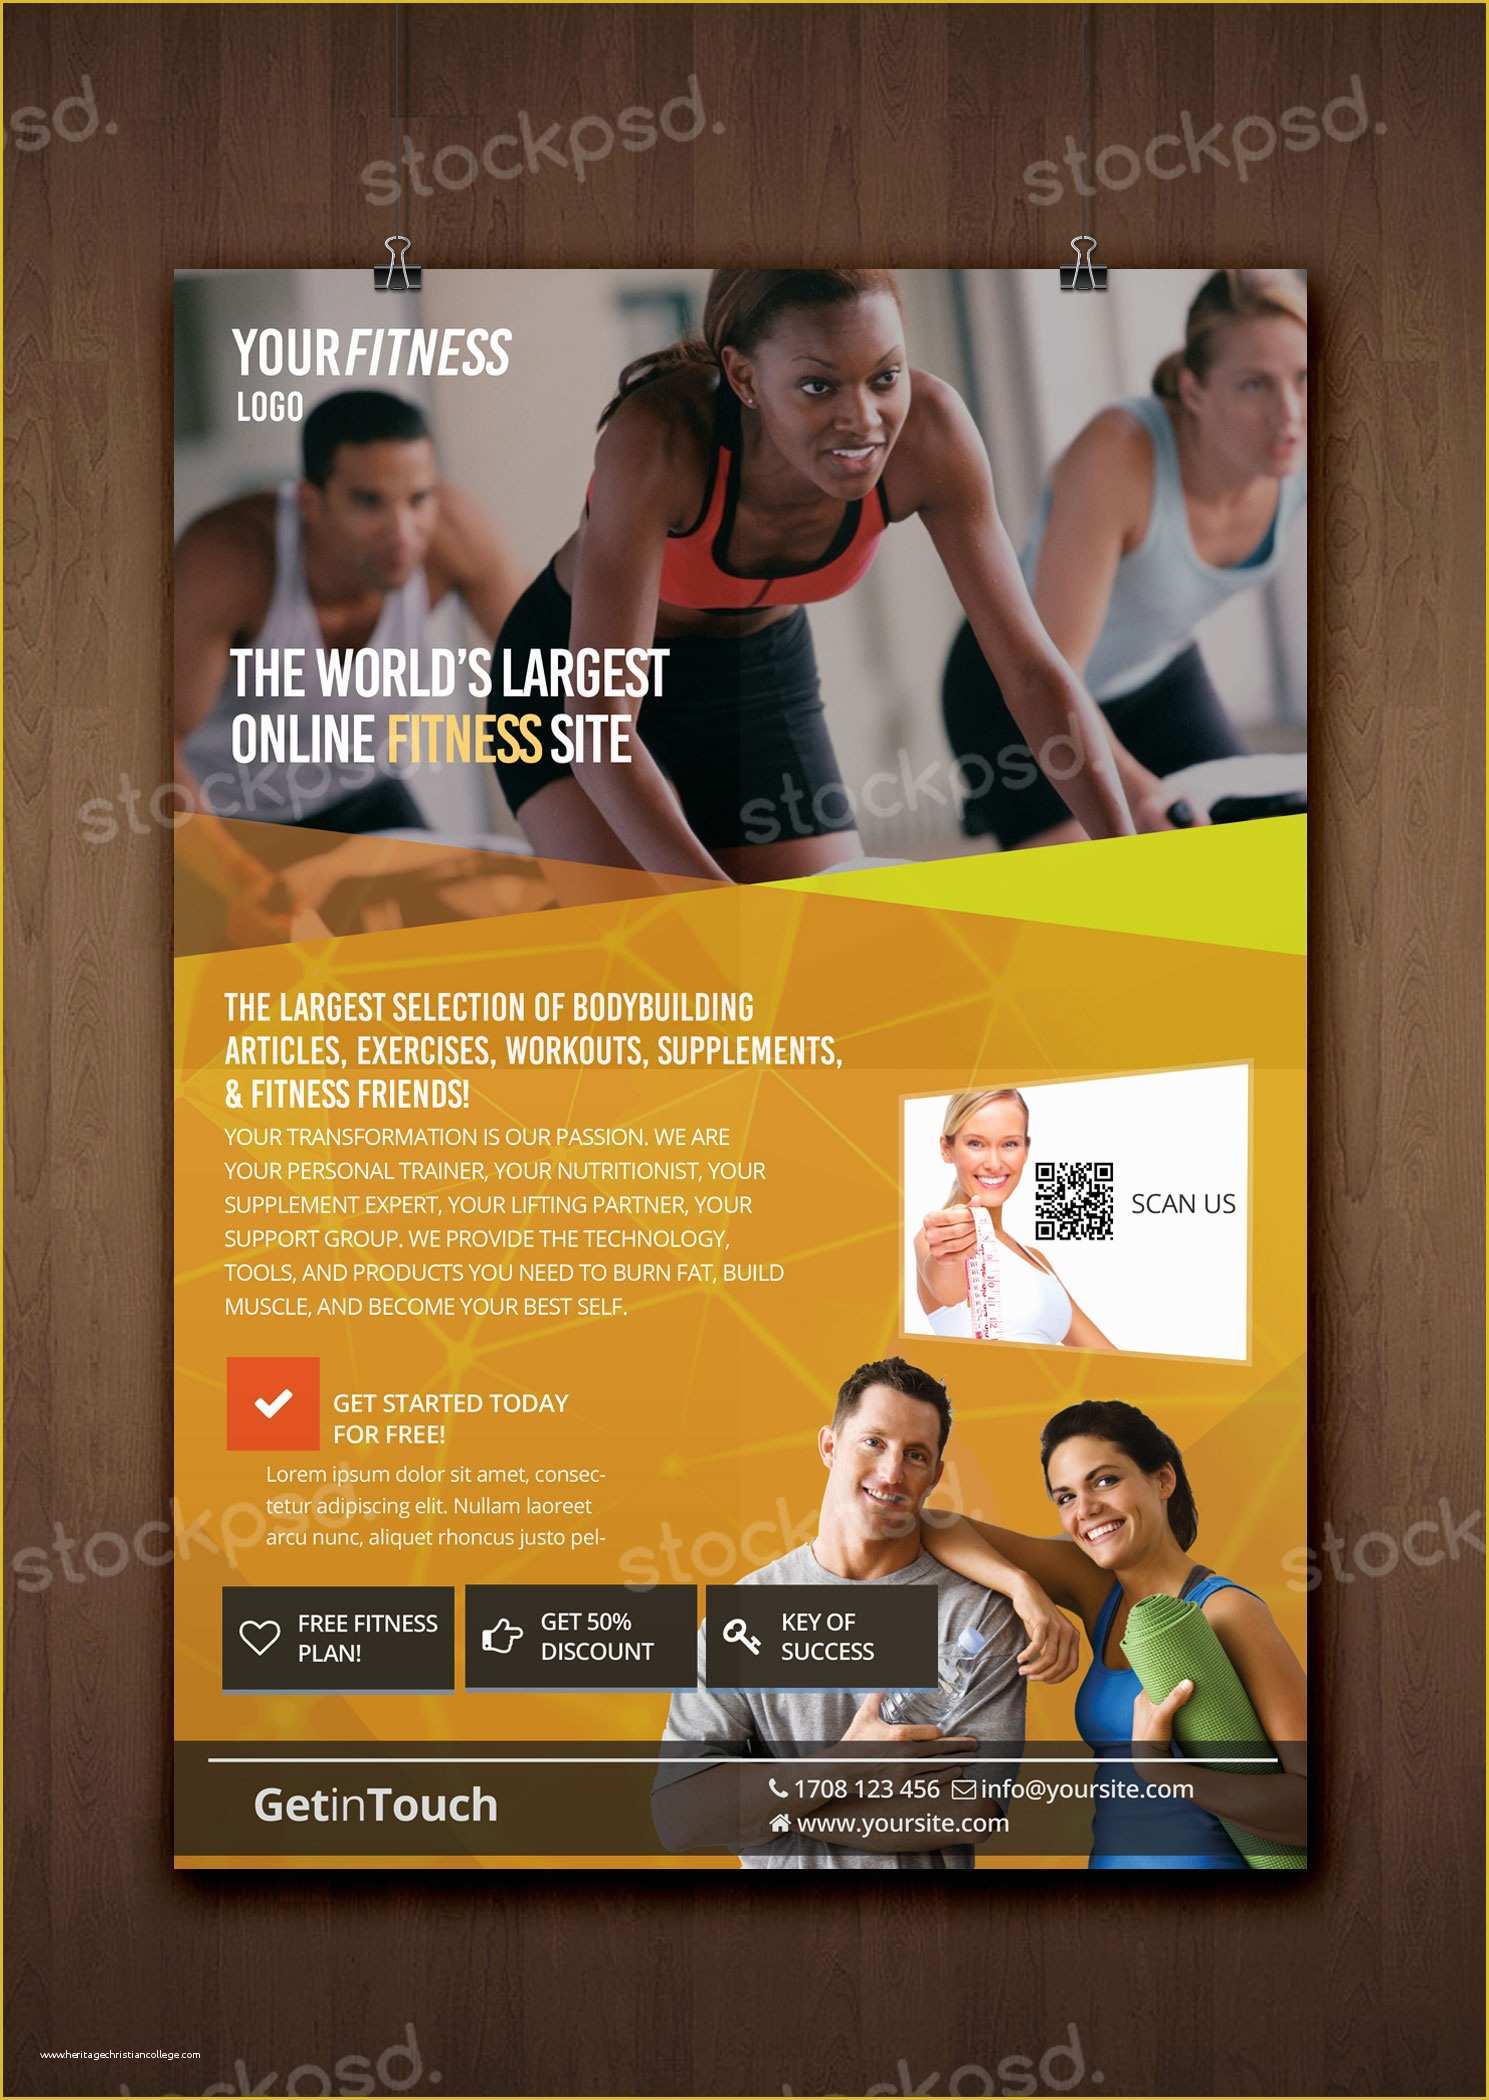 Free Templates for Flyers and Brochures Of Fitness Gym & Health Free Psd Flyer Template Stockpsd